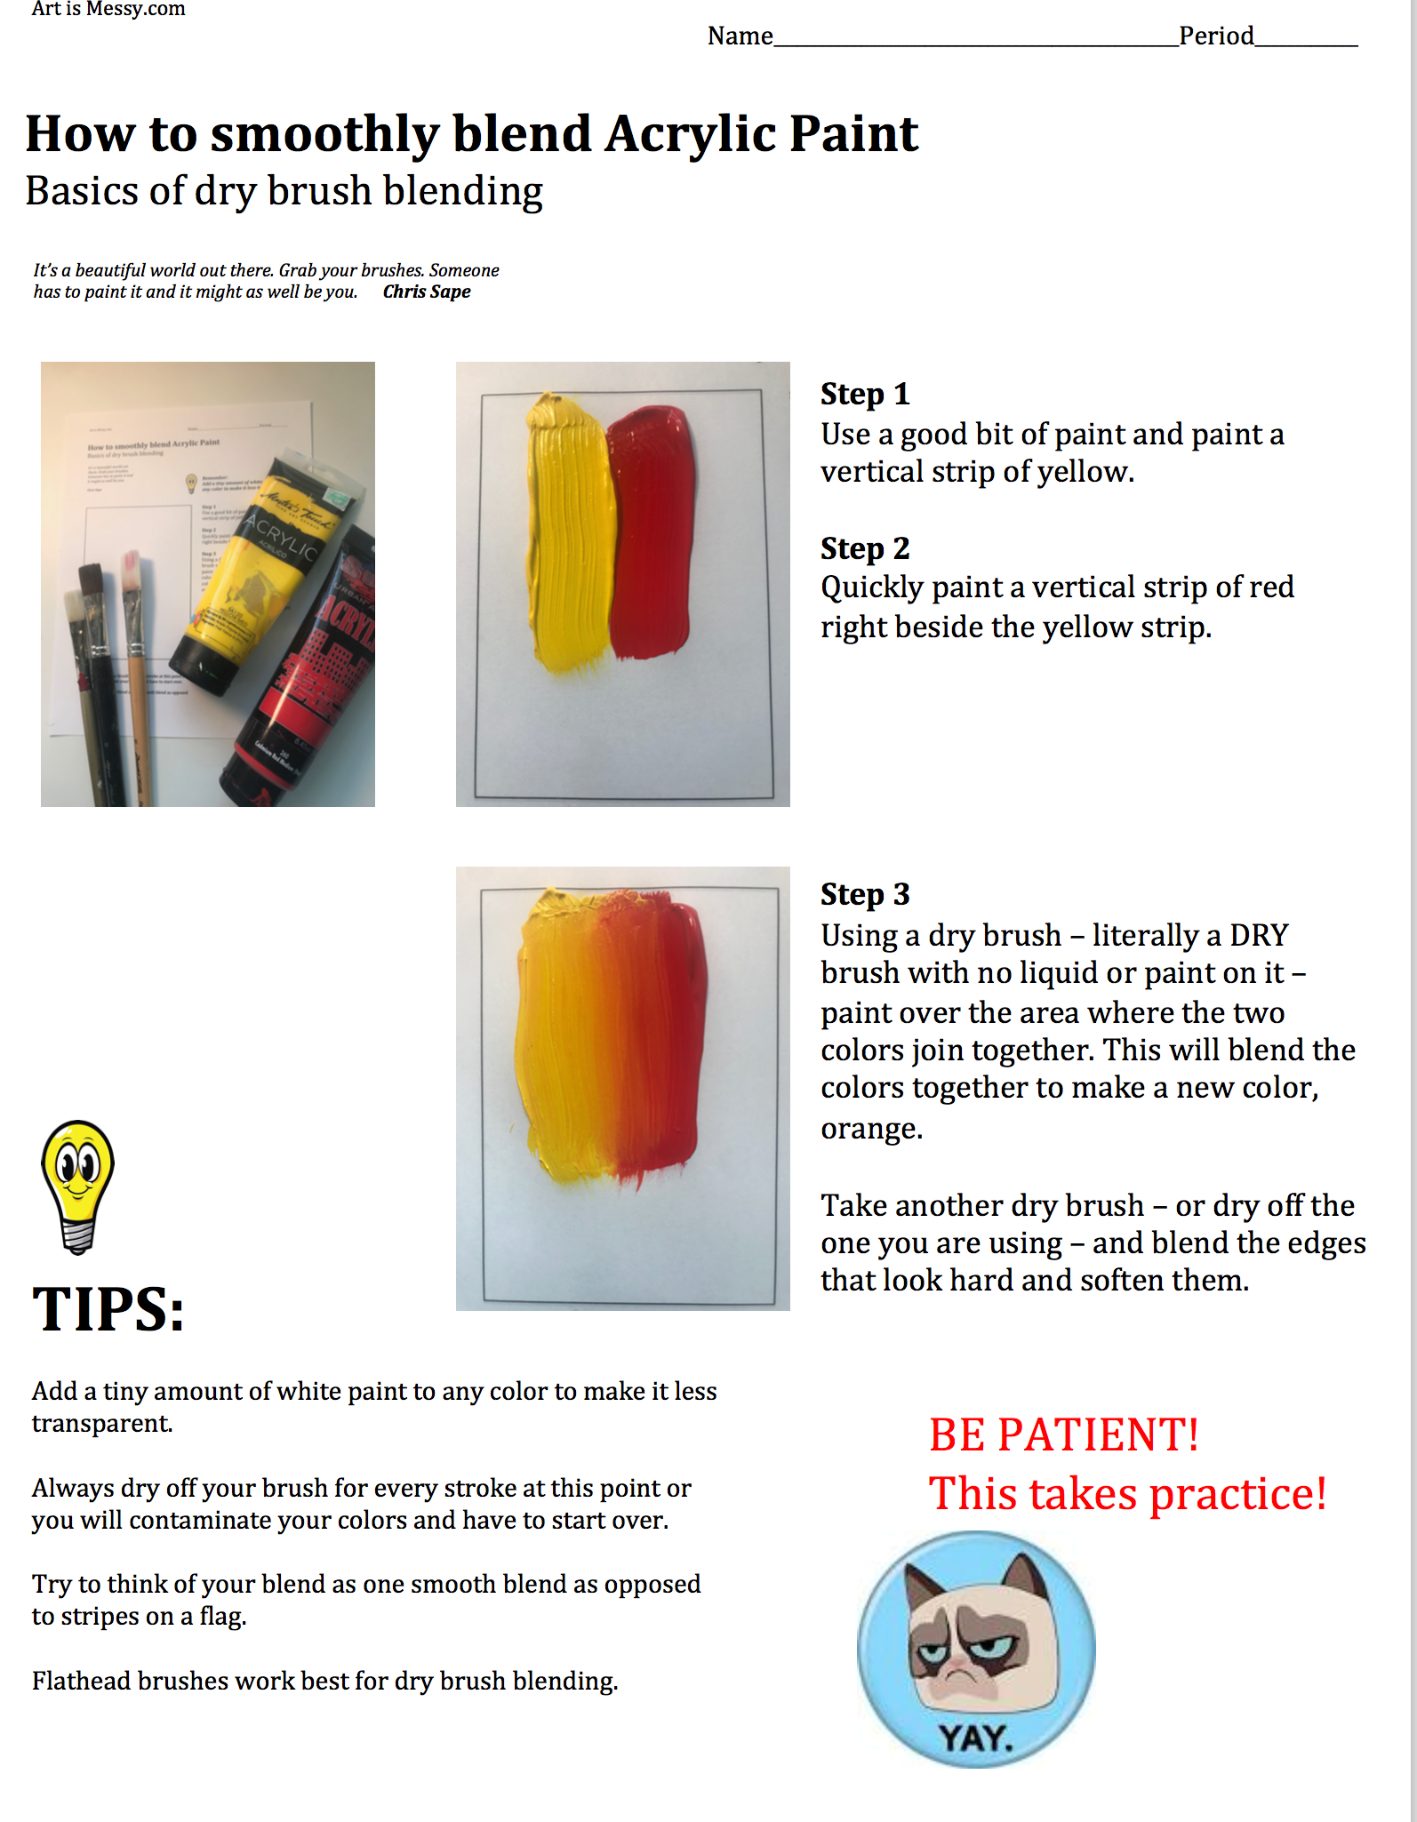 Worksheet: How to blend Acrylic Paint